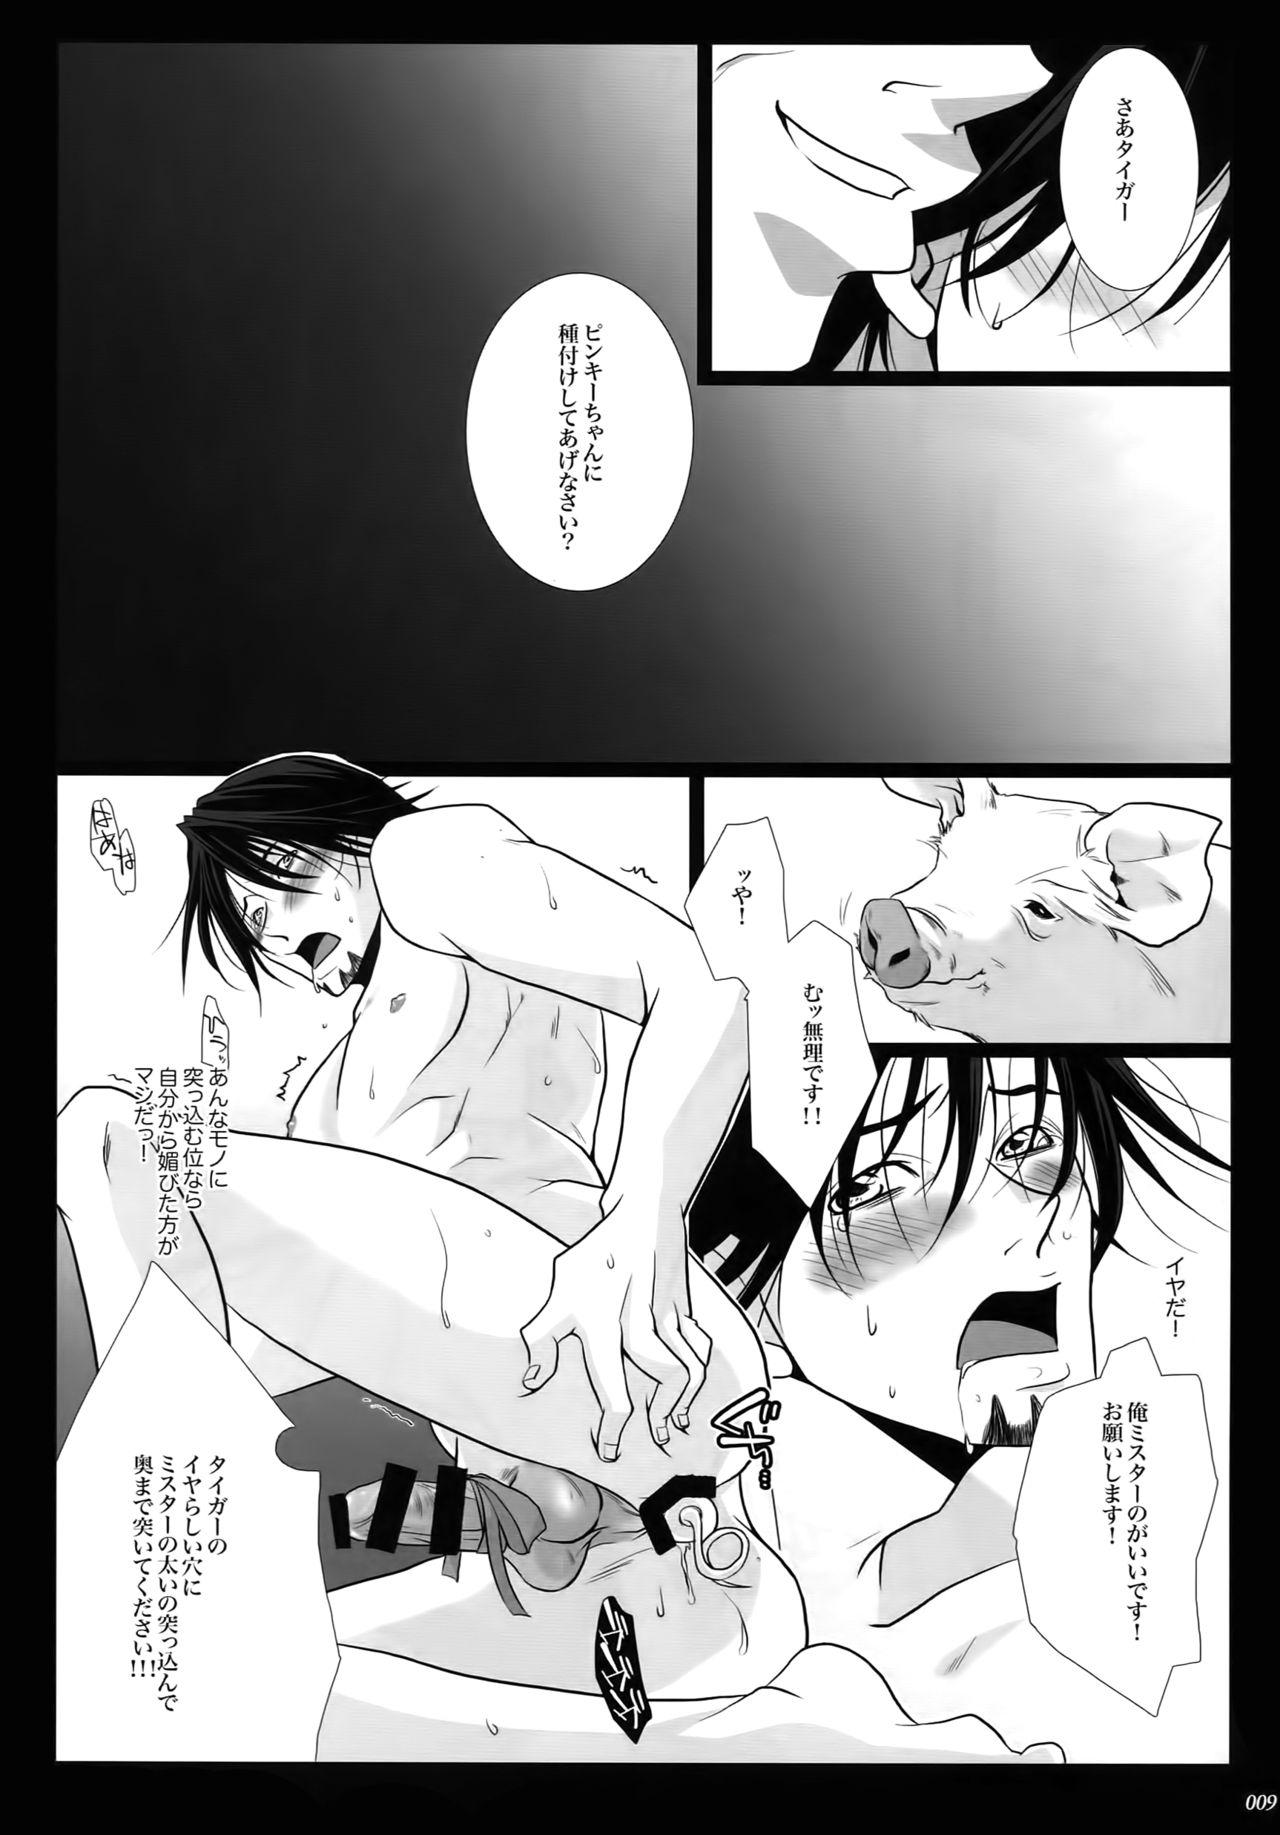 Free Amature Porn mob;Re - Tiger and bunny Exgf - Page 8